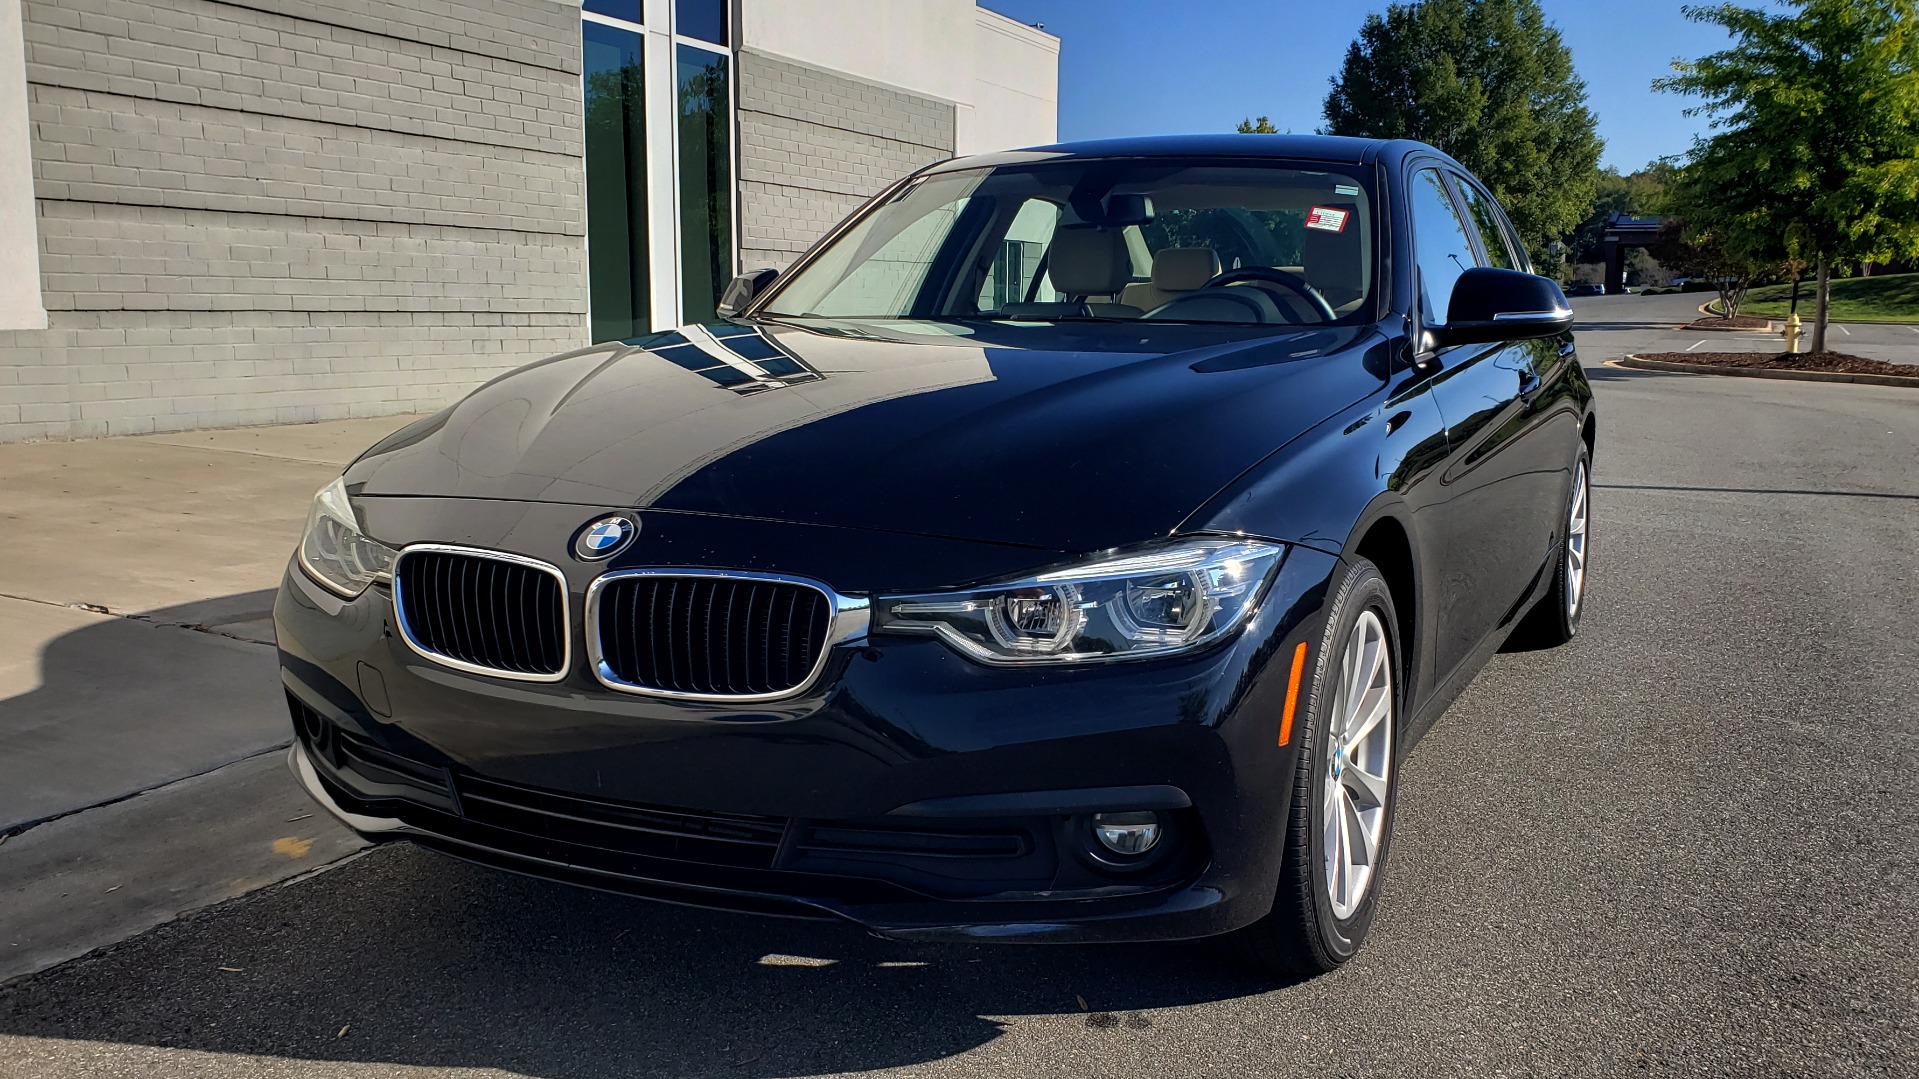 Used 2018 BMW 3 SERIES 320IXDRIVE 2.0L SEDAN / HEATED SEATS / REARVIEW for sale Sold at Formula Imports in Charlotte NC 28227 2